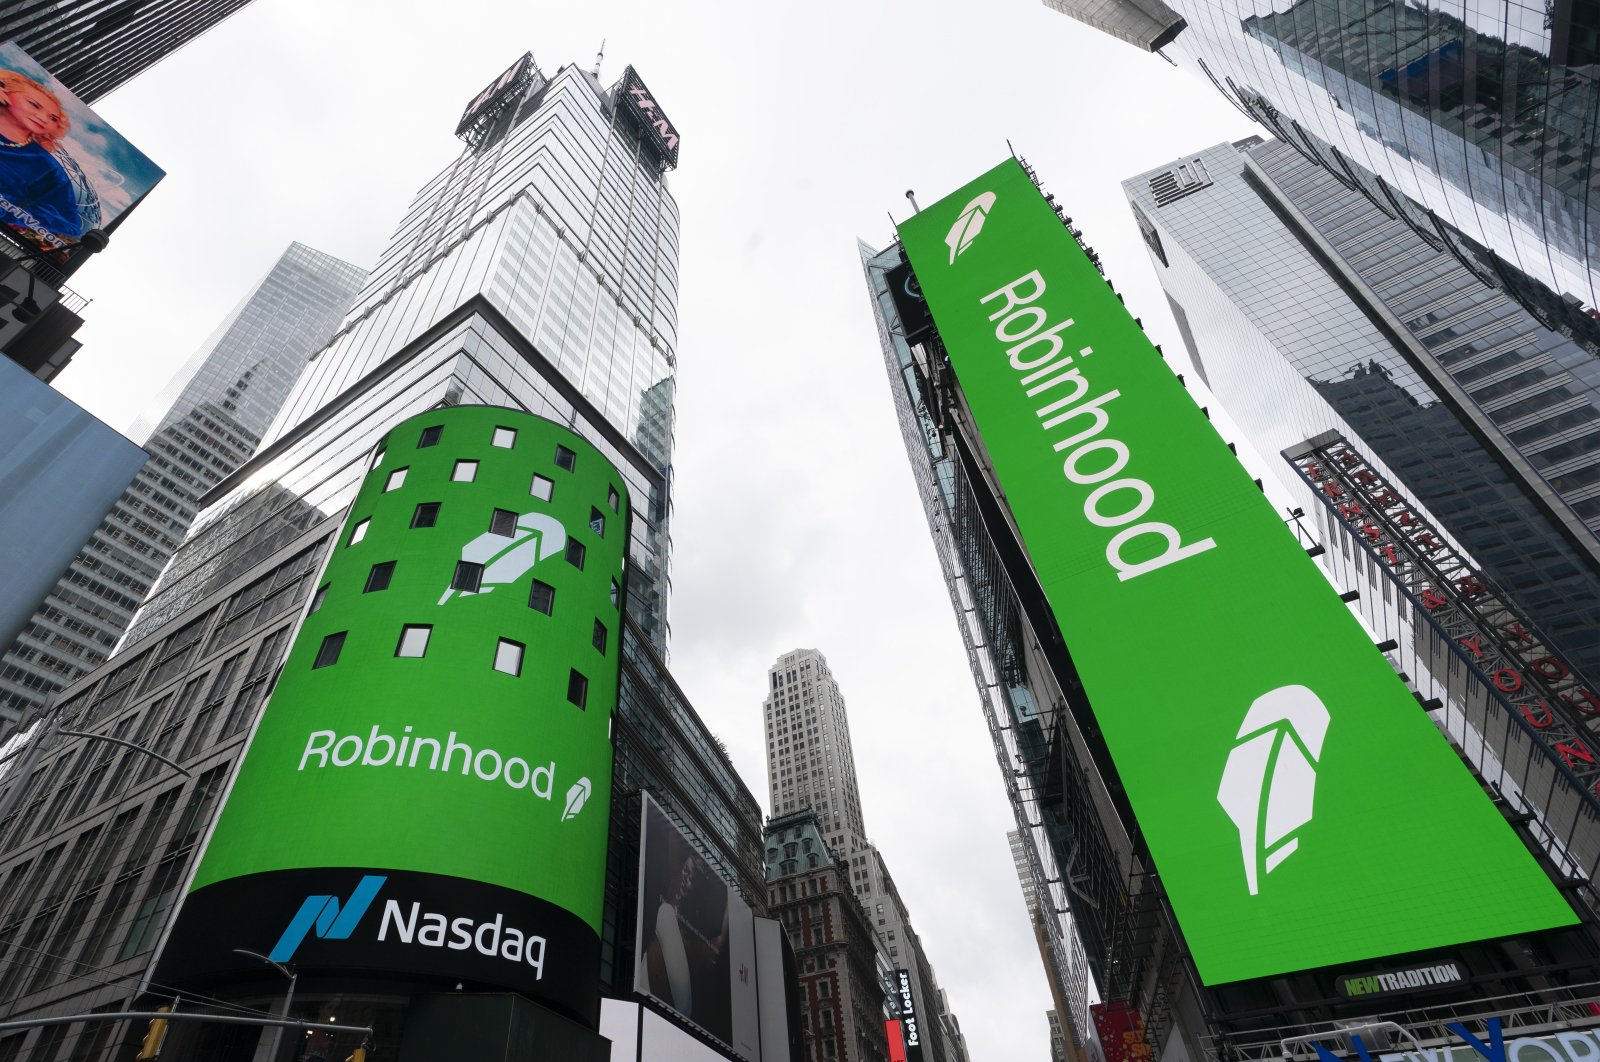 Electronic screens in Times Square announce the Robinhood IPO in New York, U.S., July 29, 2021. (AP Photo)